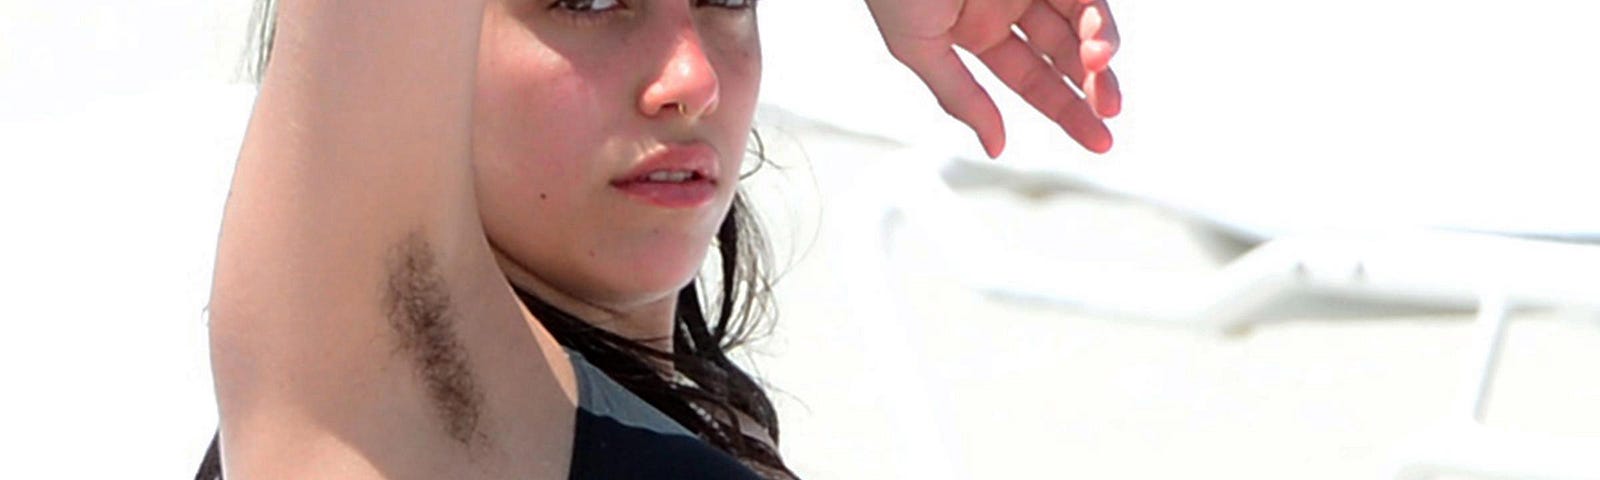 Lourdes Leon on a beach, flaunting her hairy armpit and hair-less, clean body!